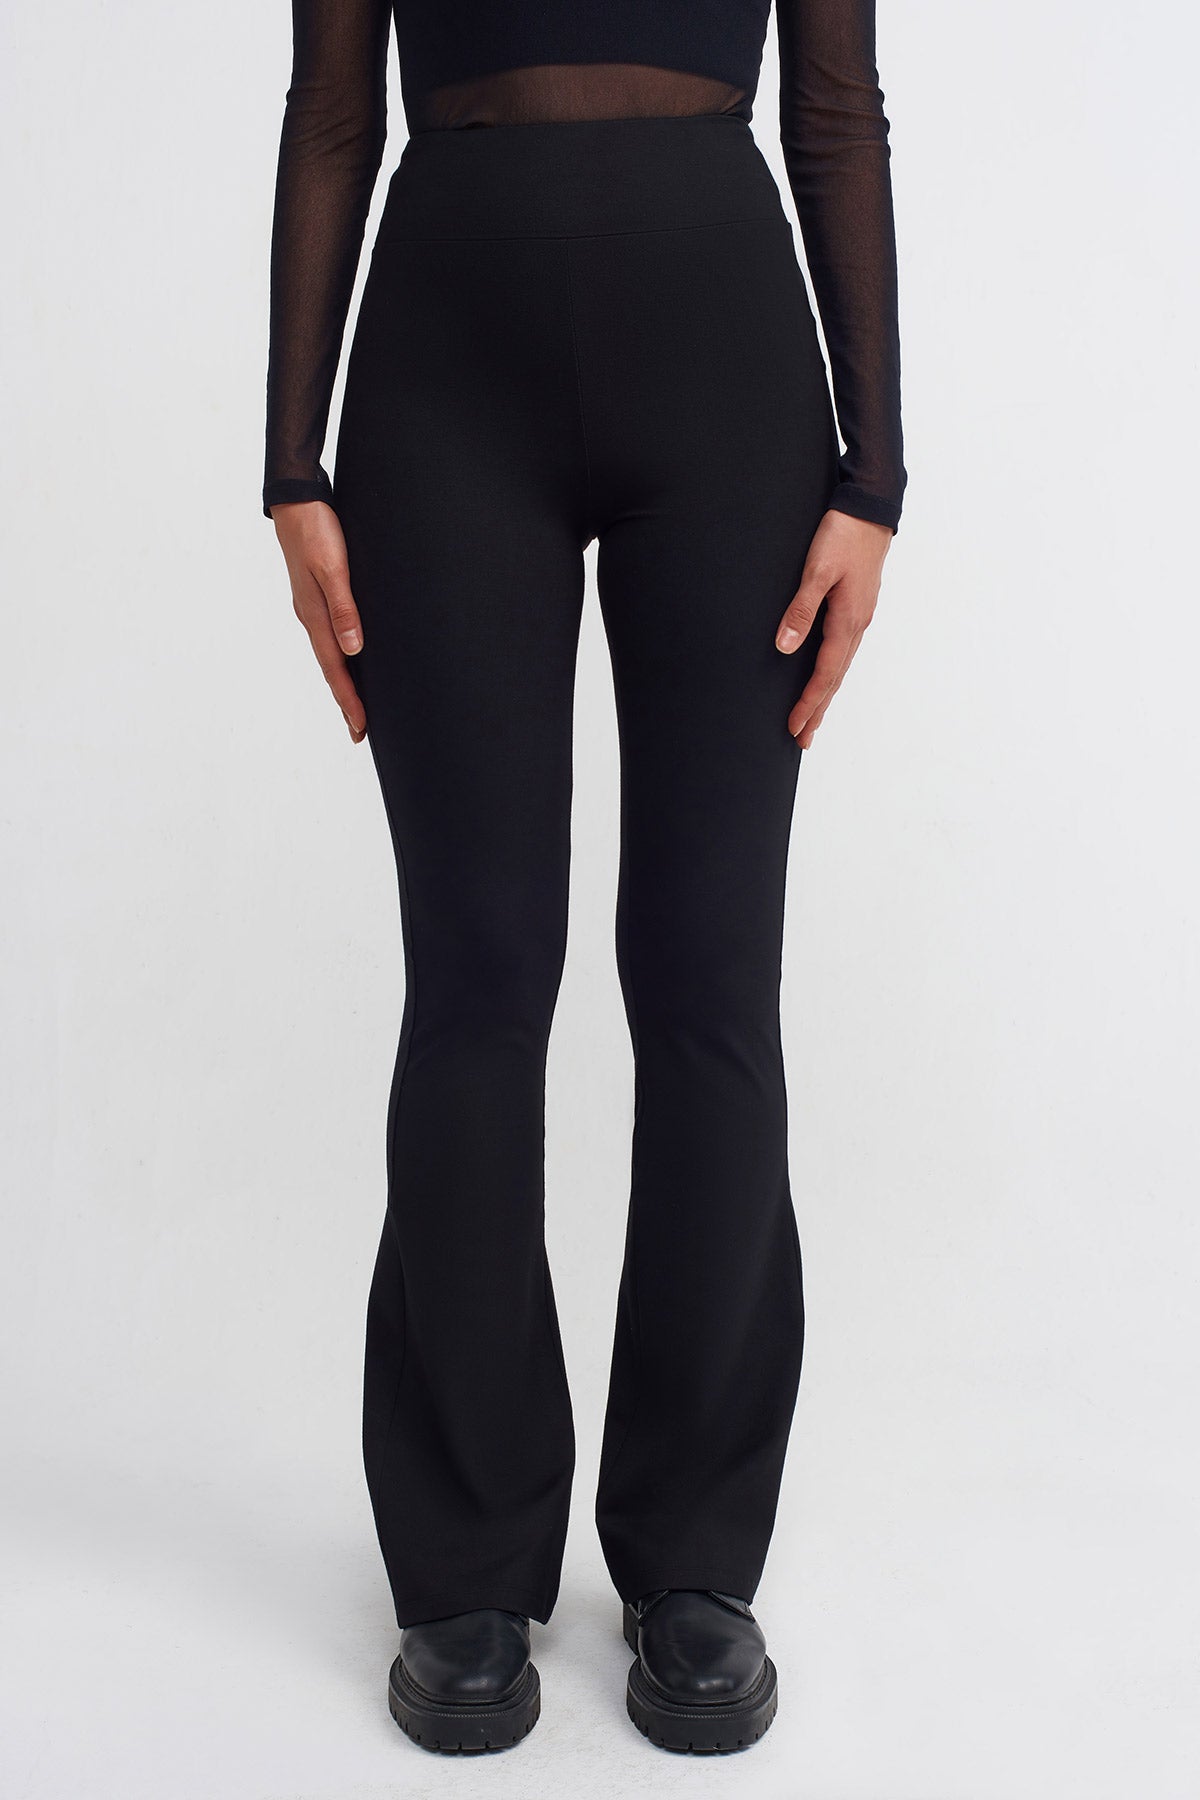 Black High-Waisted Comfort Trousers with Back Slit-K233013059